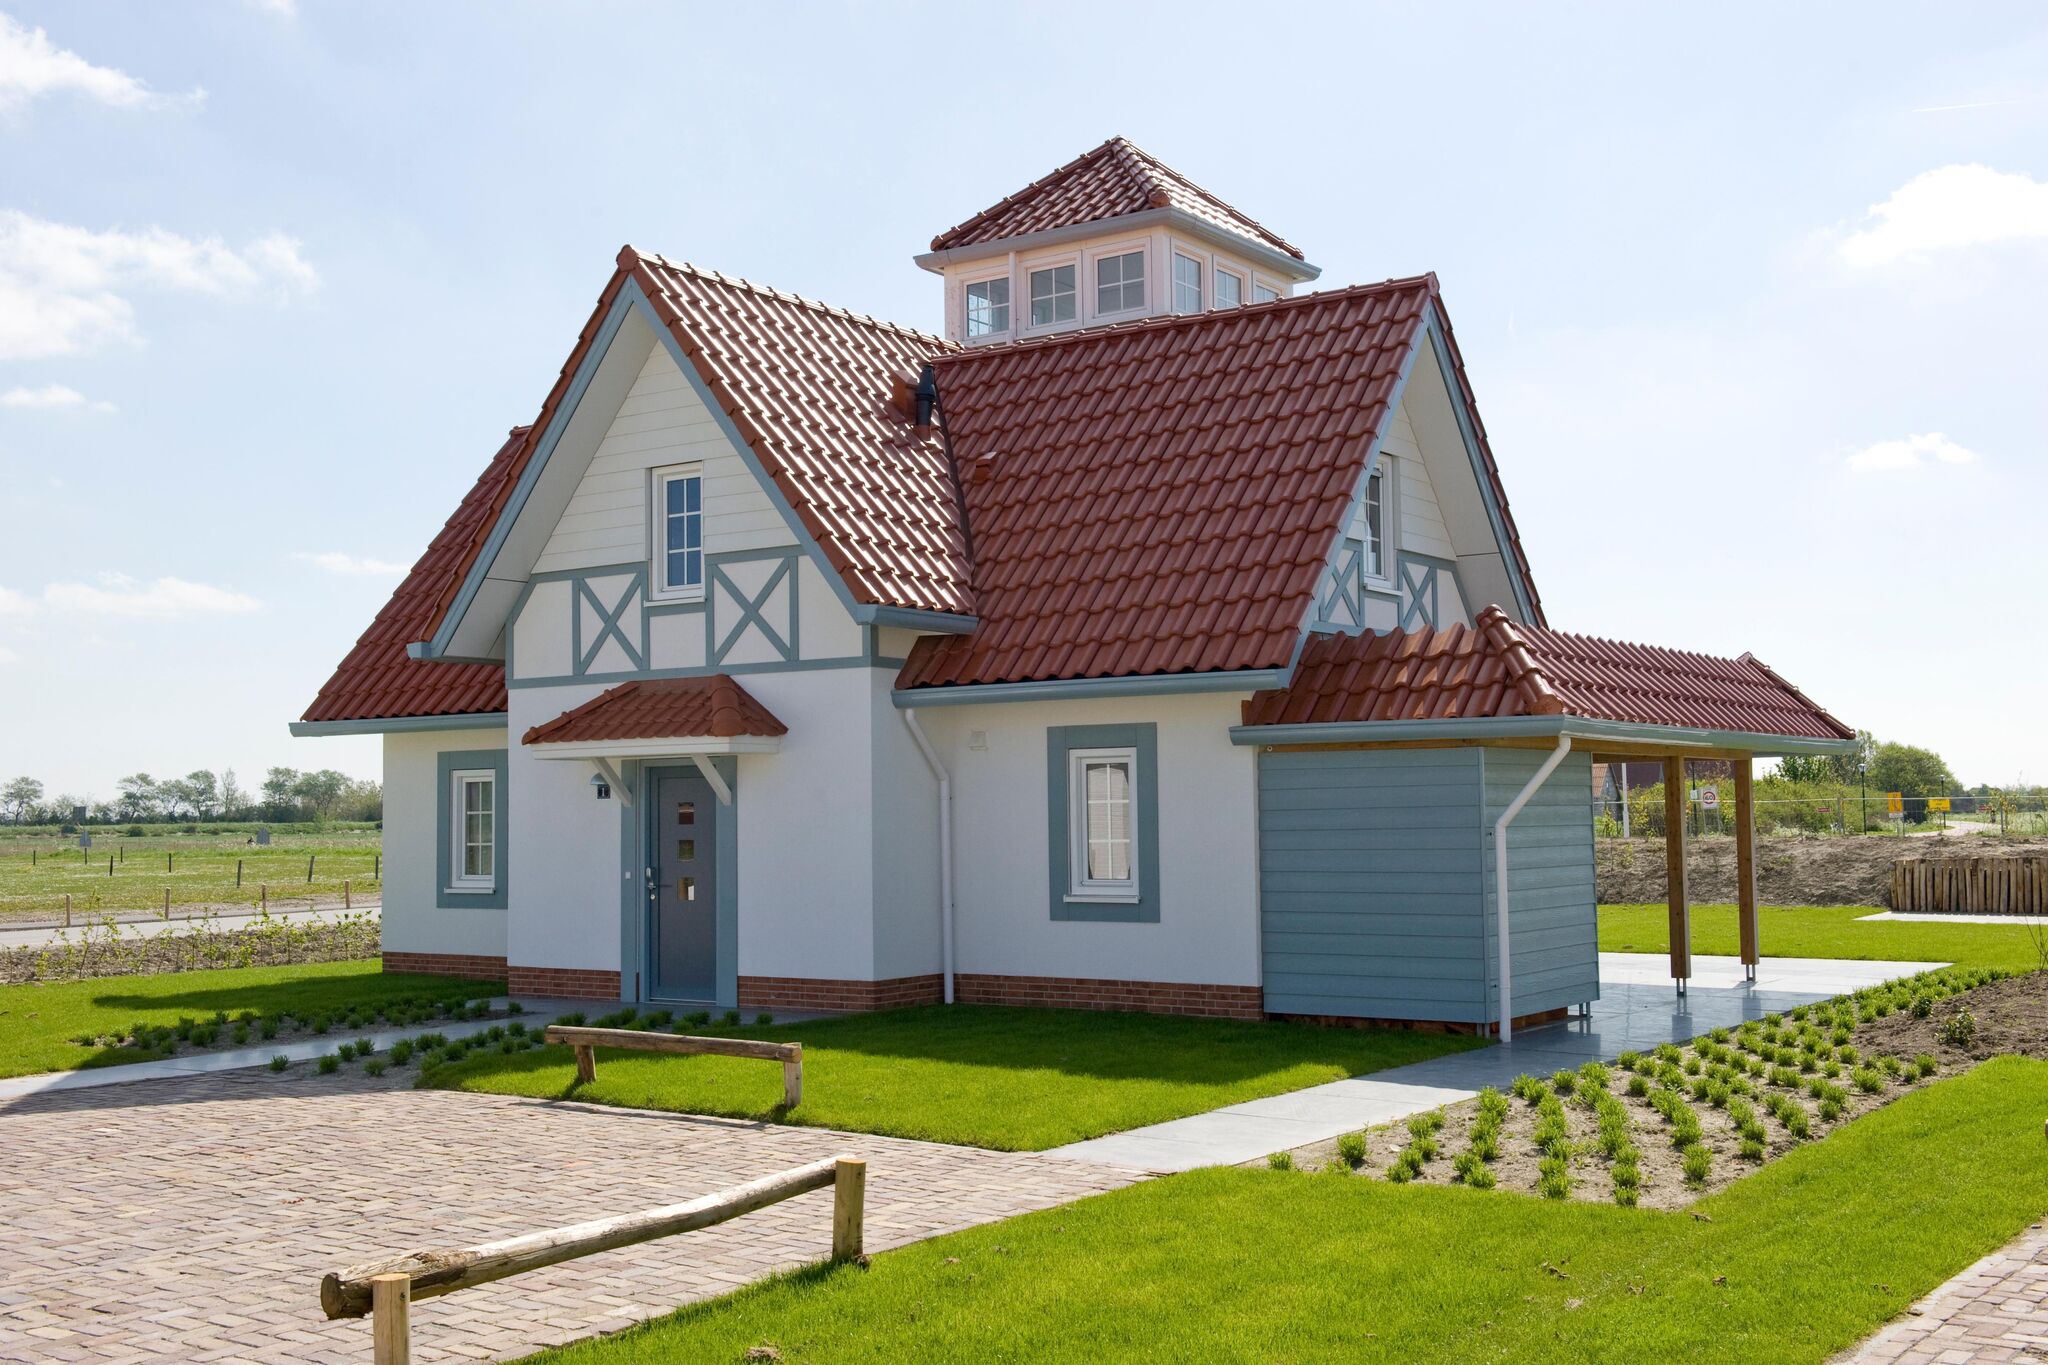 Villa with rowing boat and sauna, near the beach